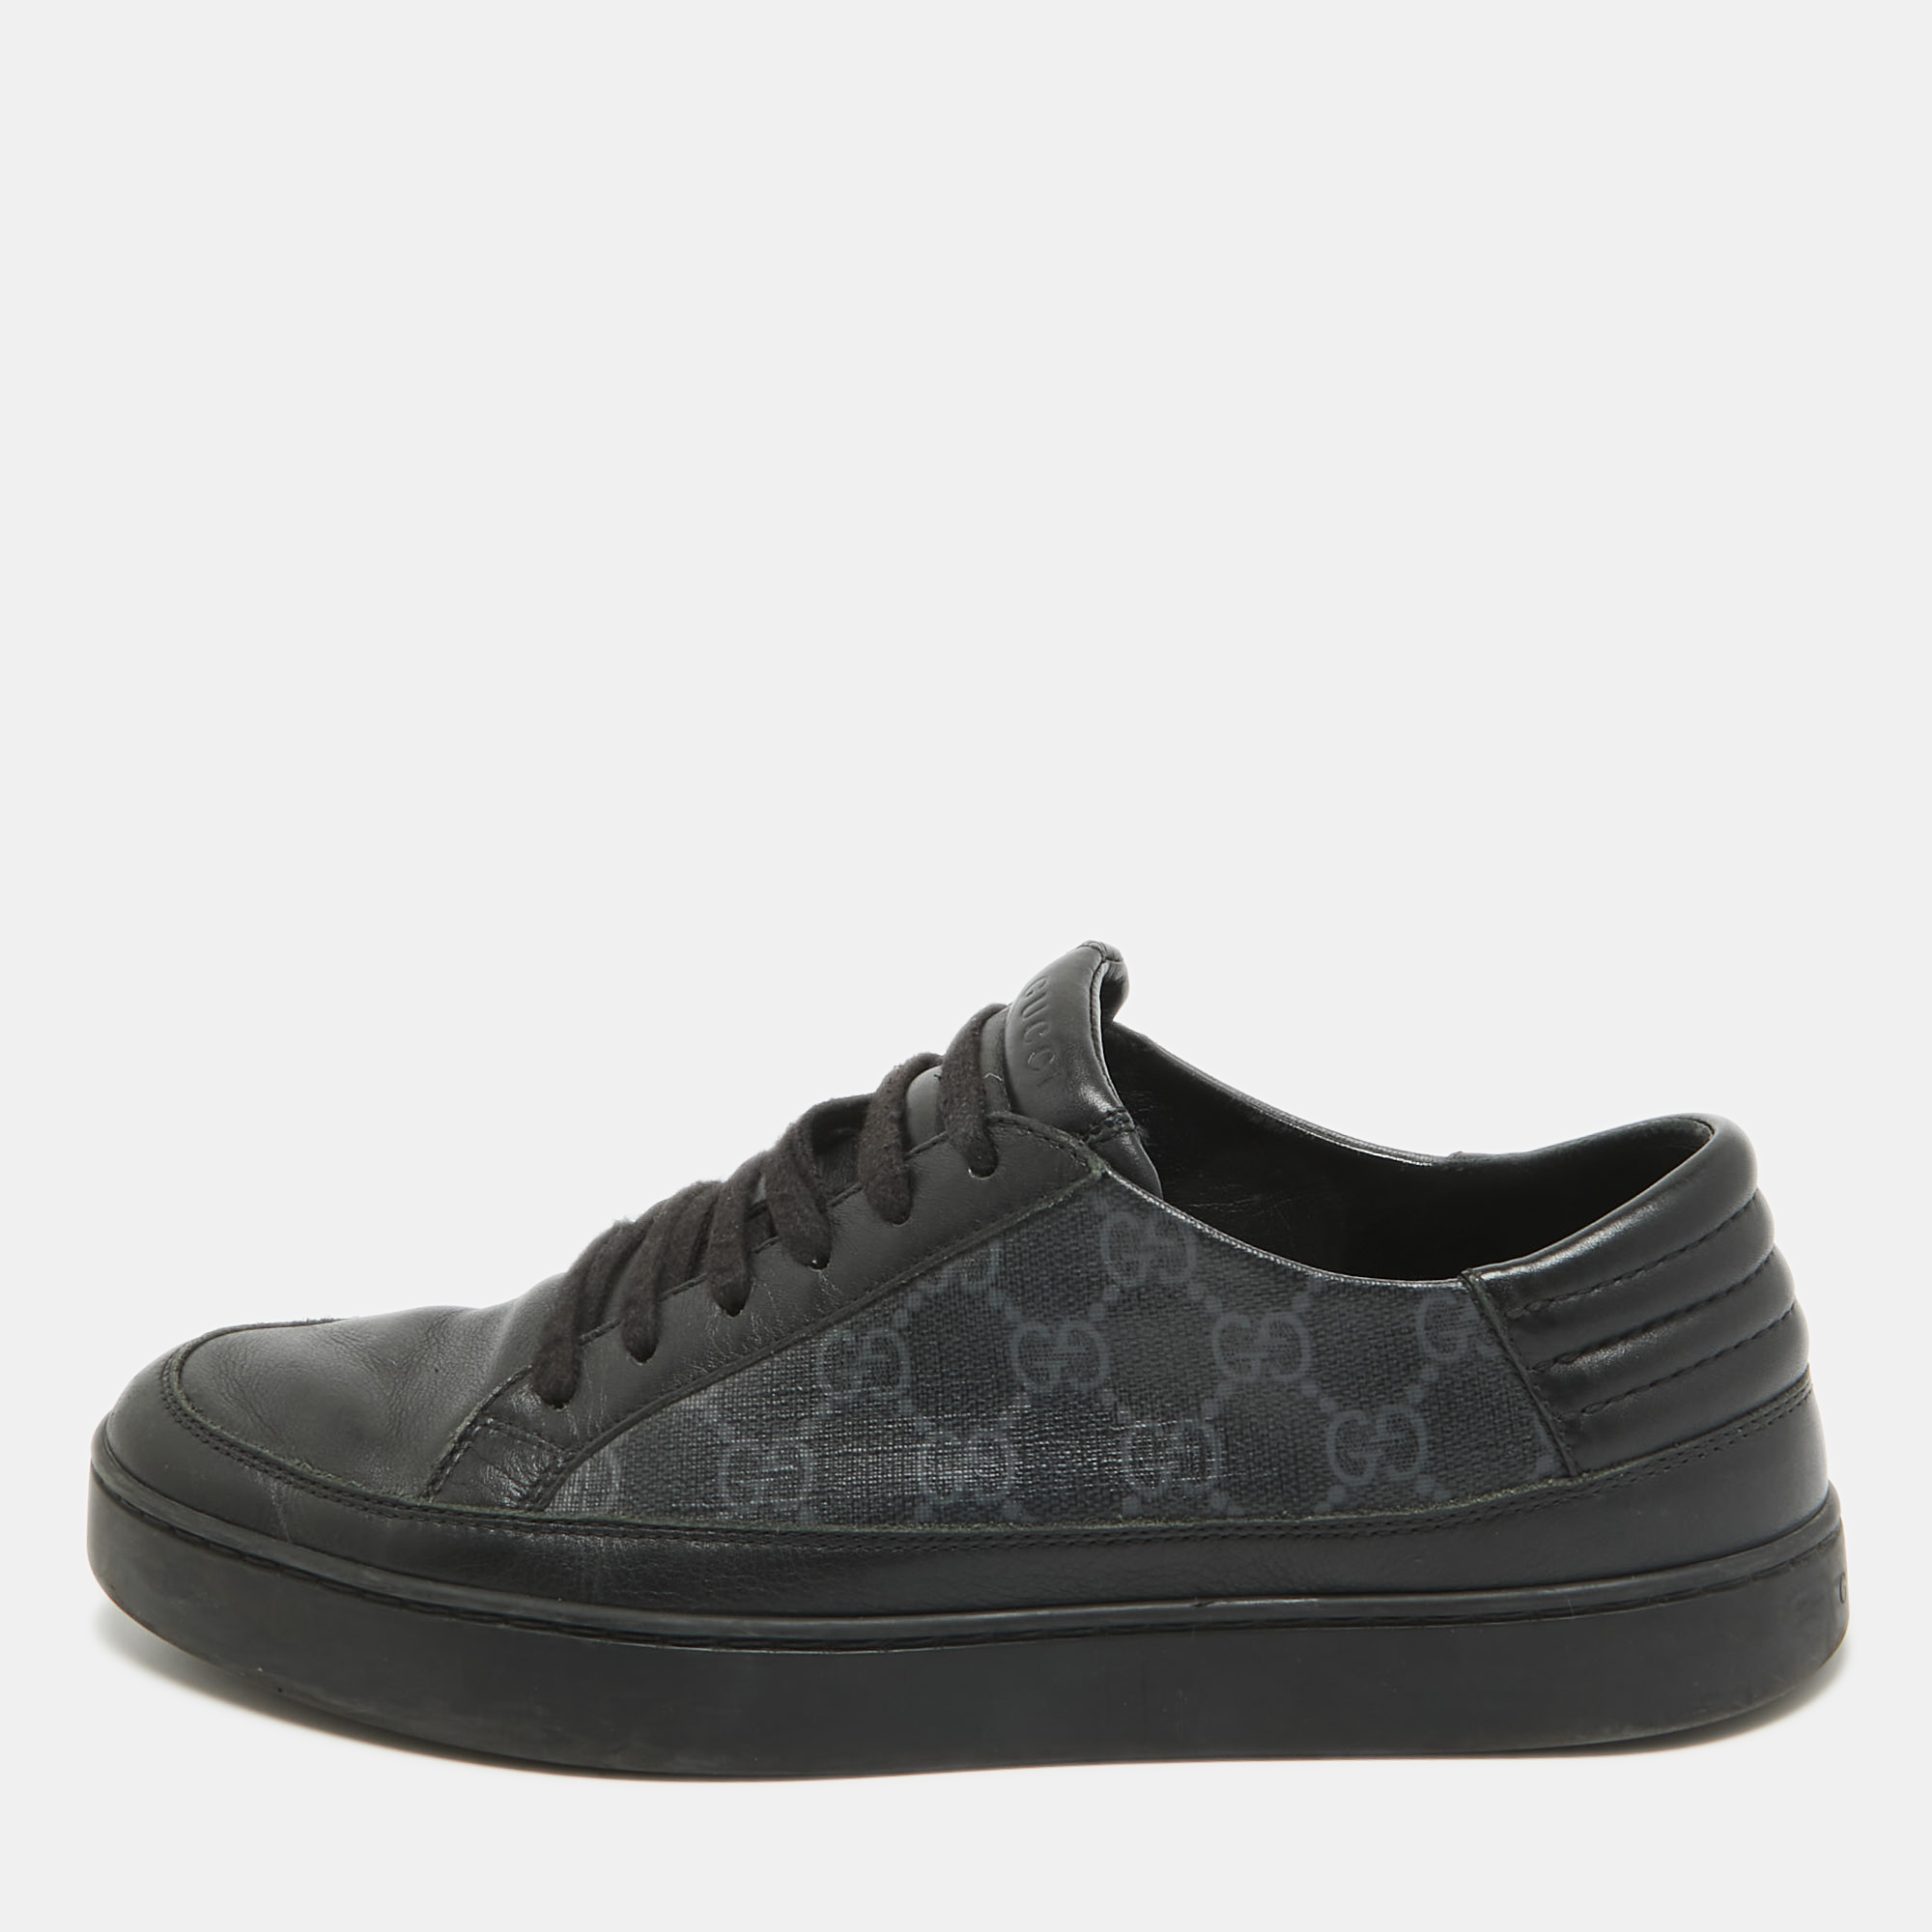 

Gucci Black/Grey GG Canvas and Leather Low Top Sneakers Size 41.5